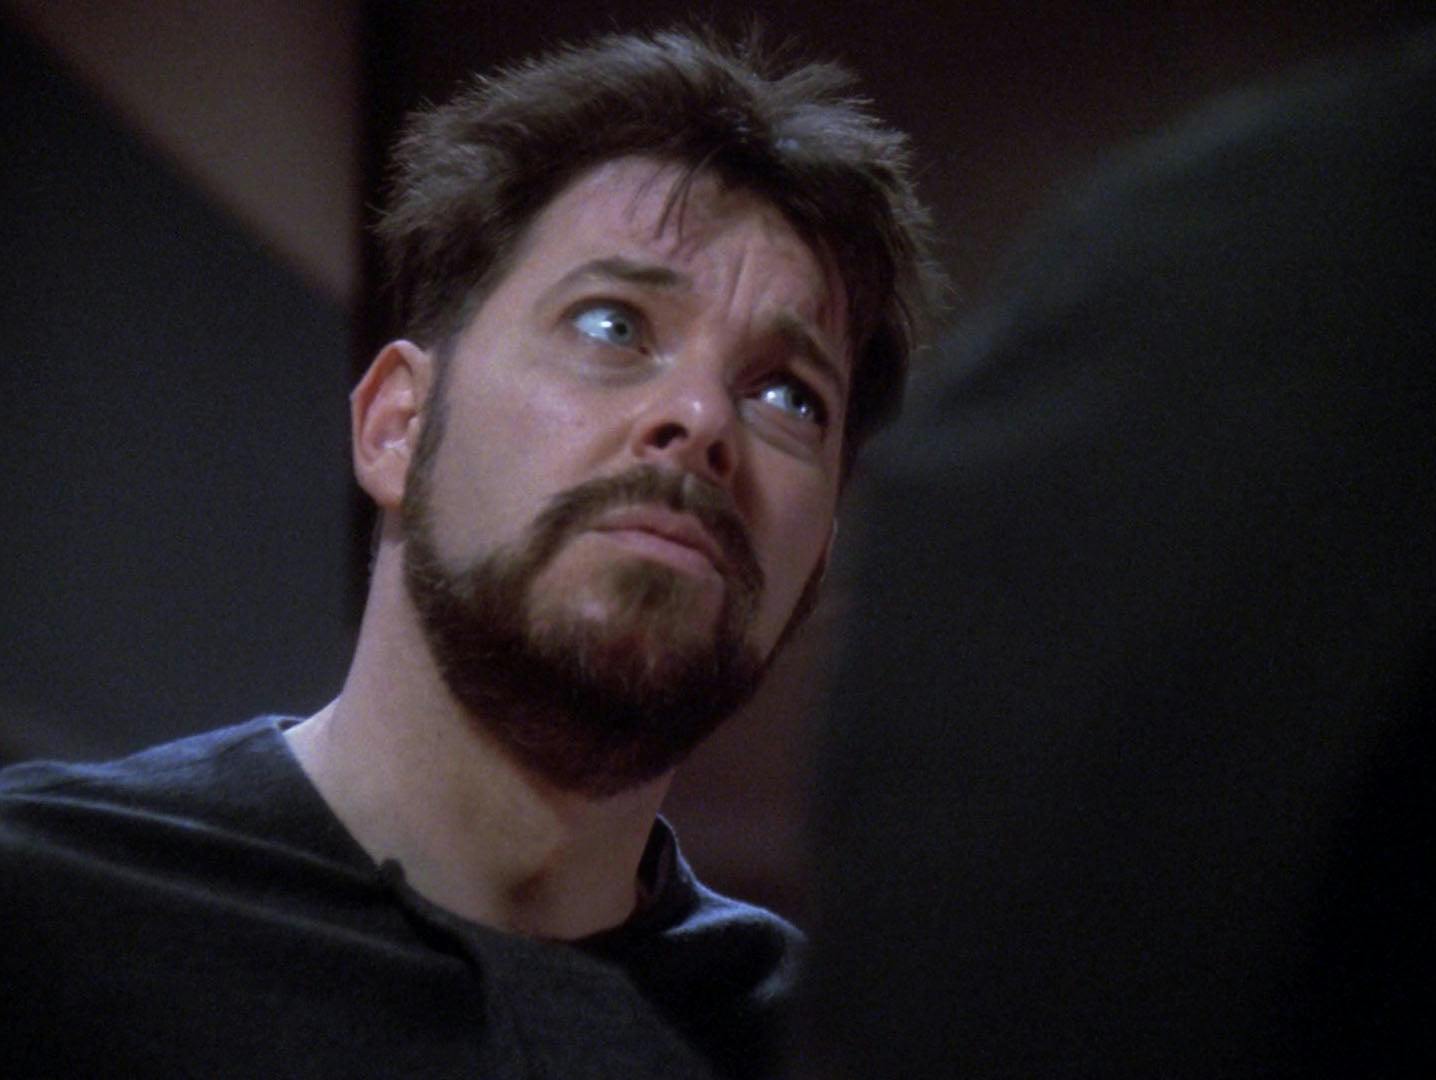 Riker looks disheveled as he sits in a chair.